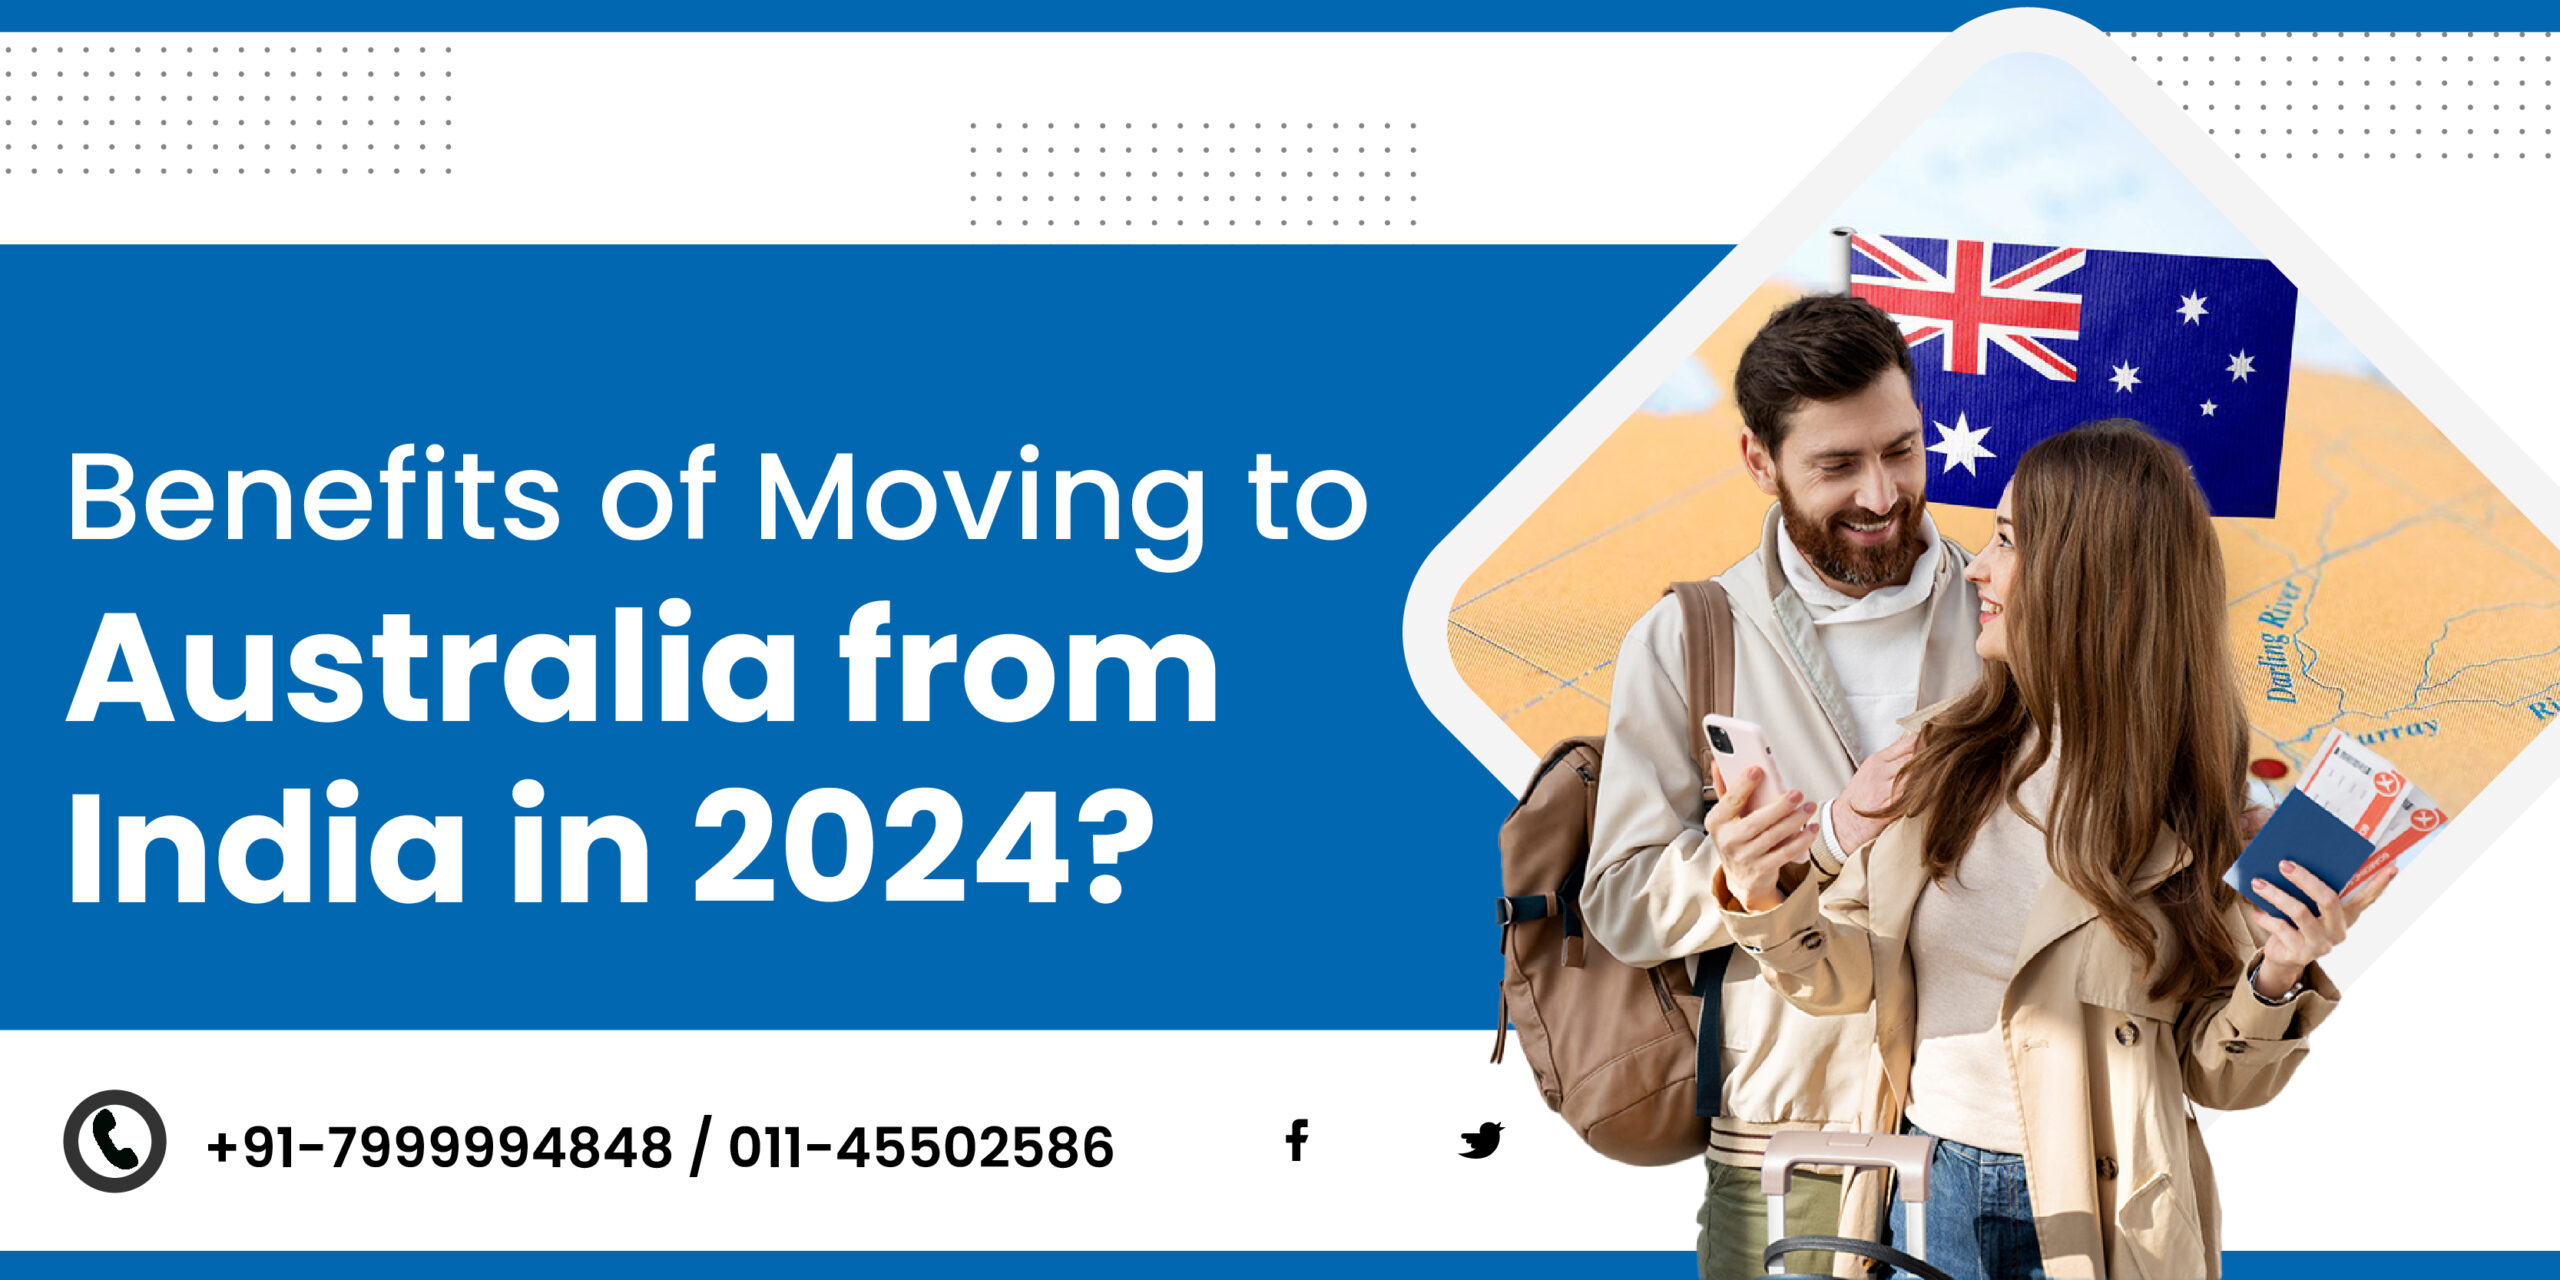 Benefits of Moving to Australia from India in 2024